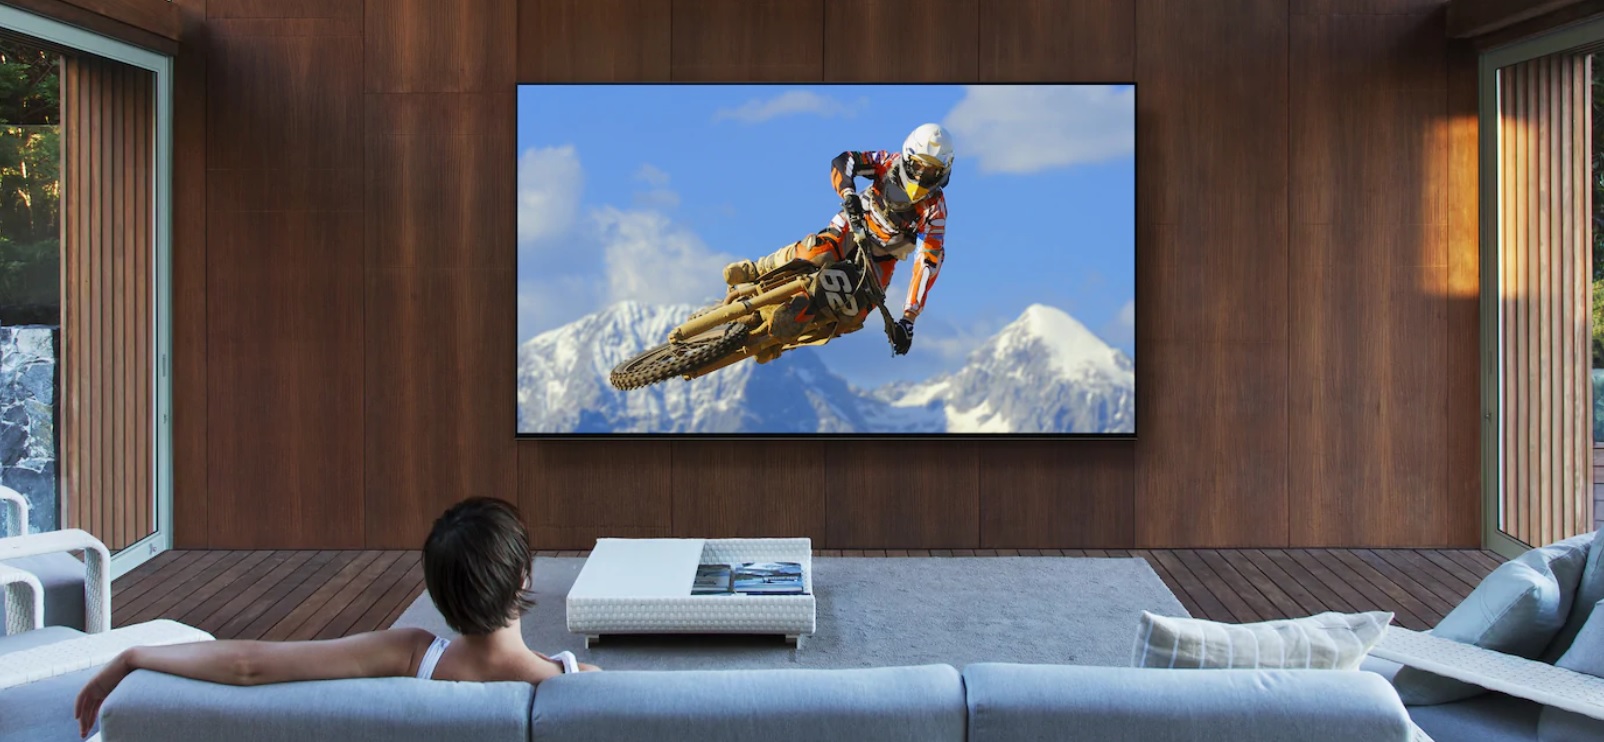 image of a woman on a sofa watching a mountain biker on smart TV